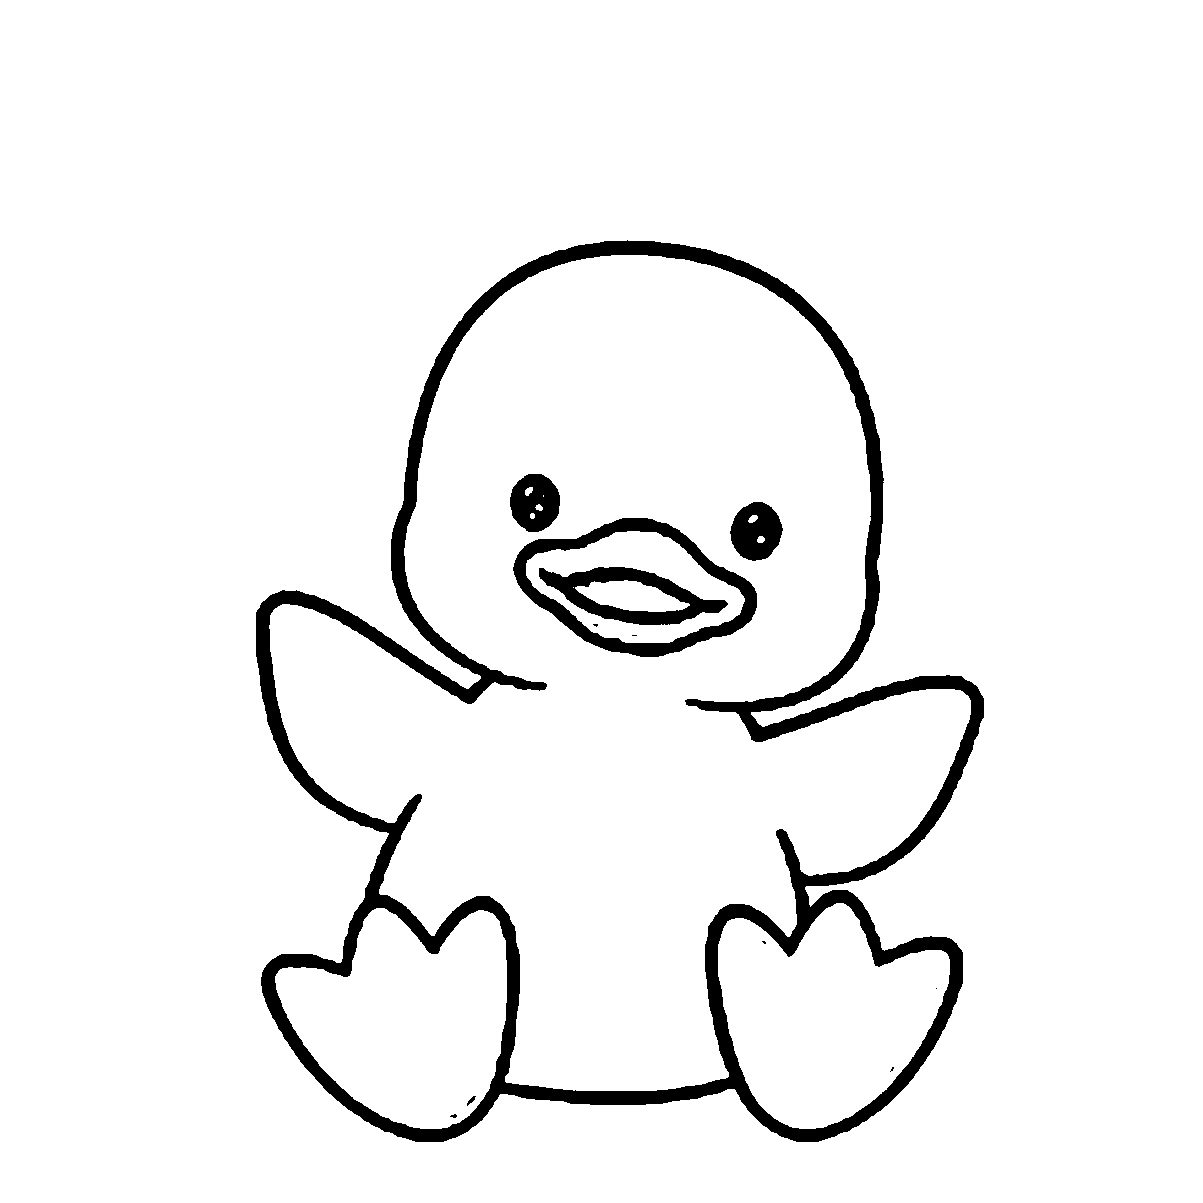 Duck coloring #9, Download drawings